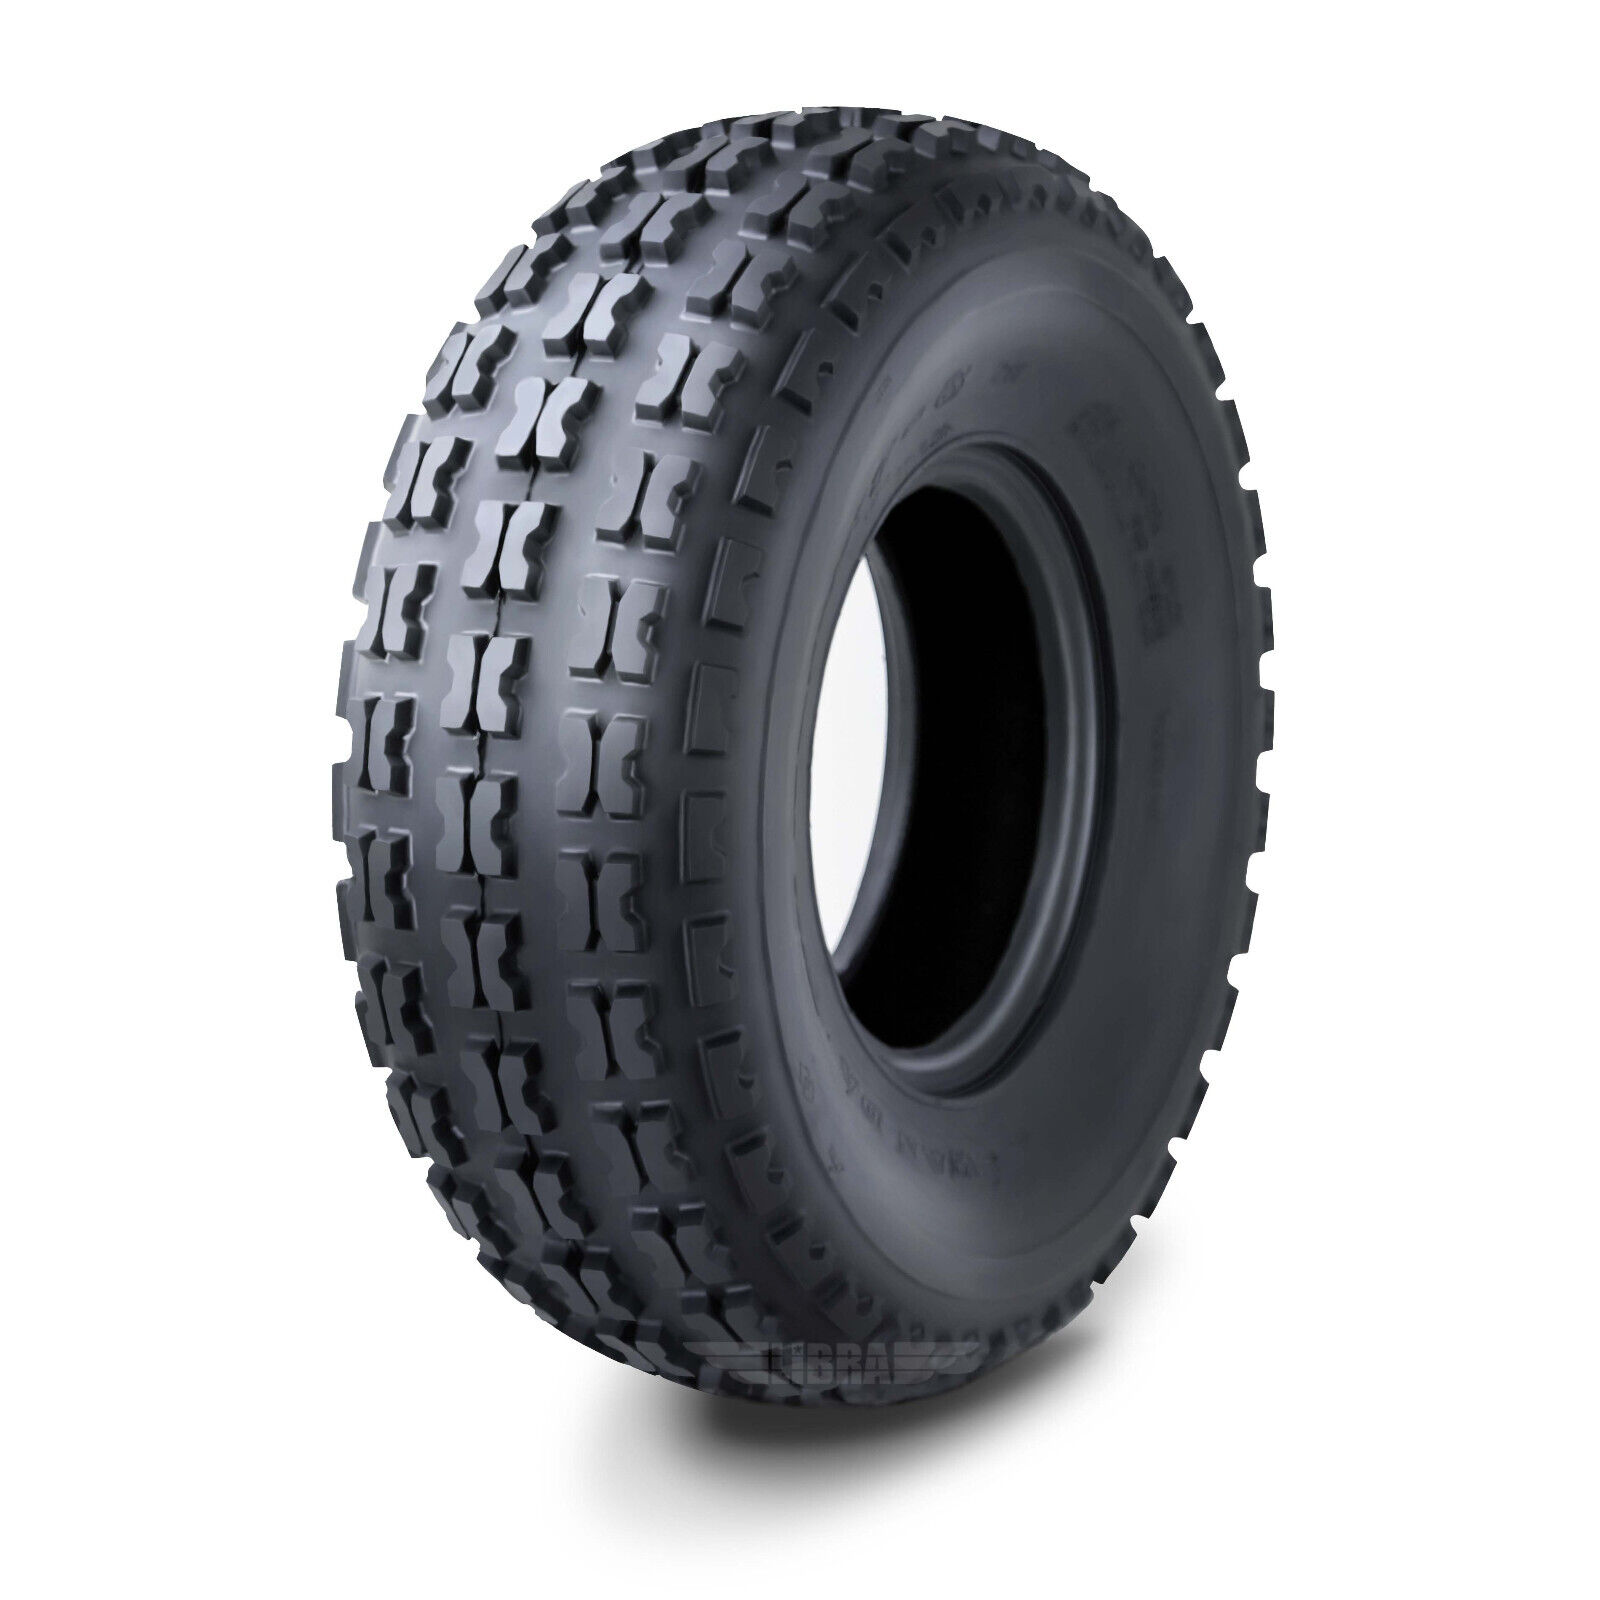 FRONT TIRE 19X7.00-8